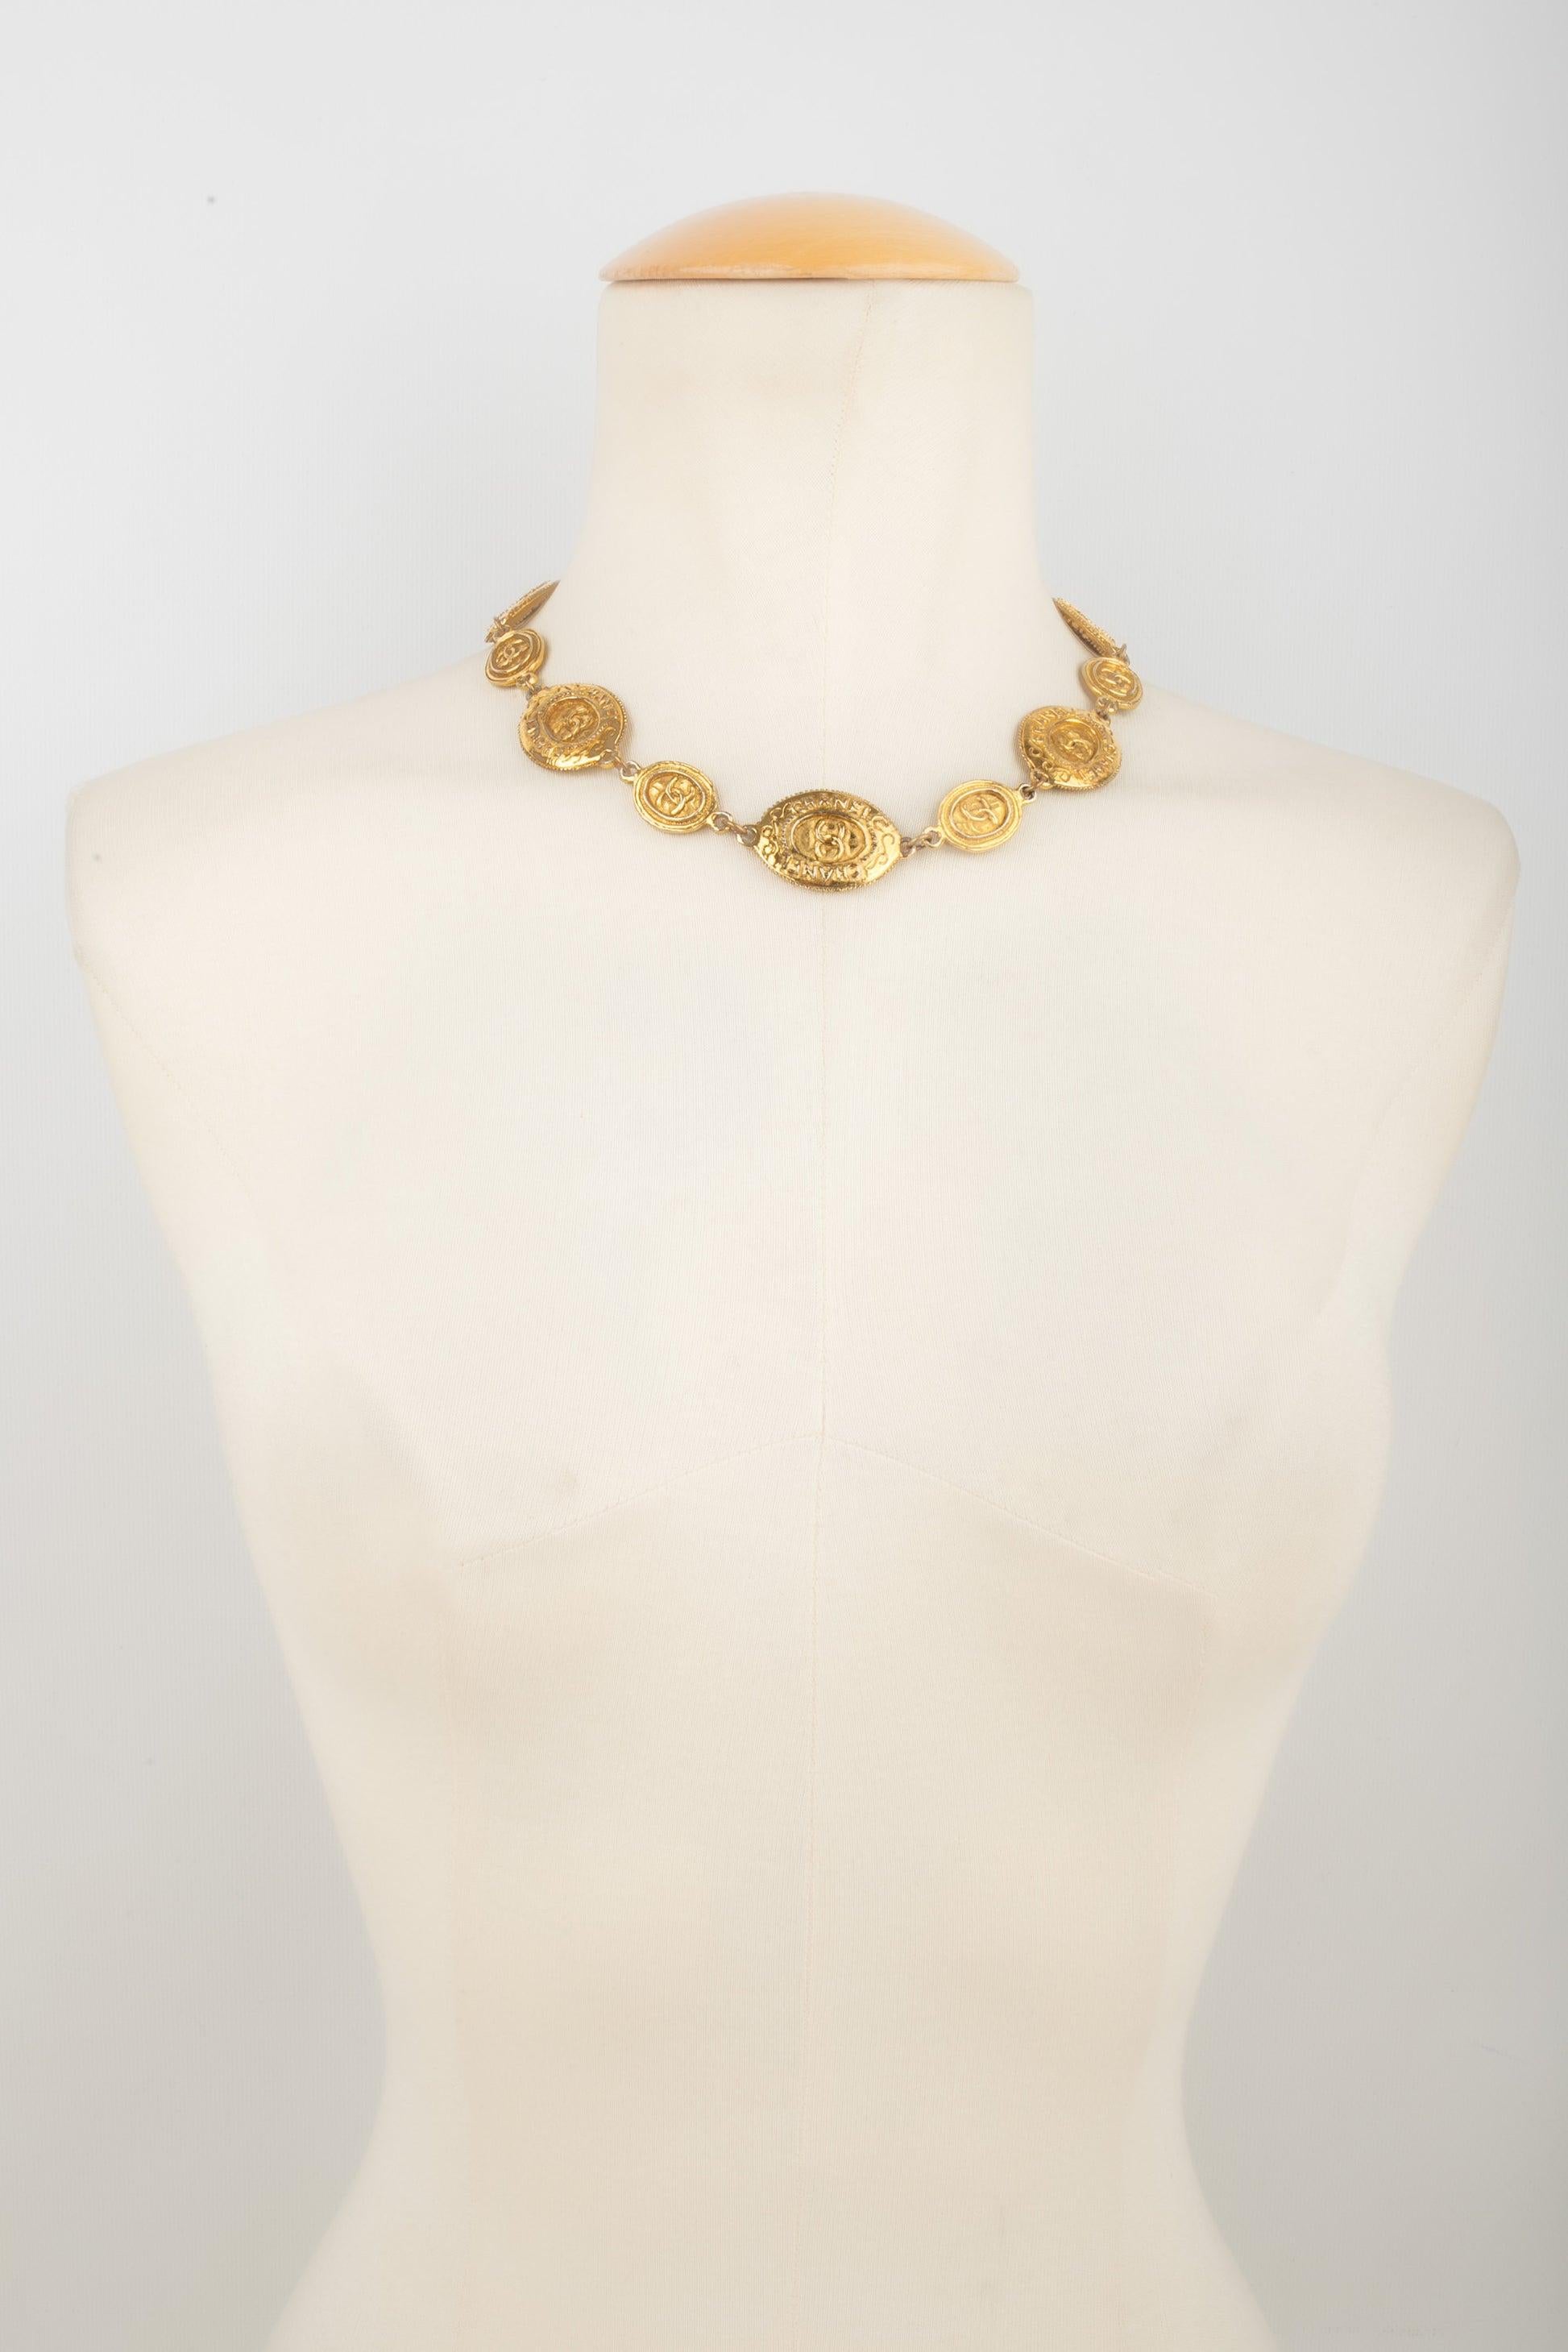 Chanel - (Made in France) Golden metal short necklace with oval medallions. Slight oxidization of the metal.

Additional information:
Condition: Good condition
Dimensions: Length: 47 cm

Seller Reference: CB249
